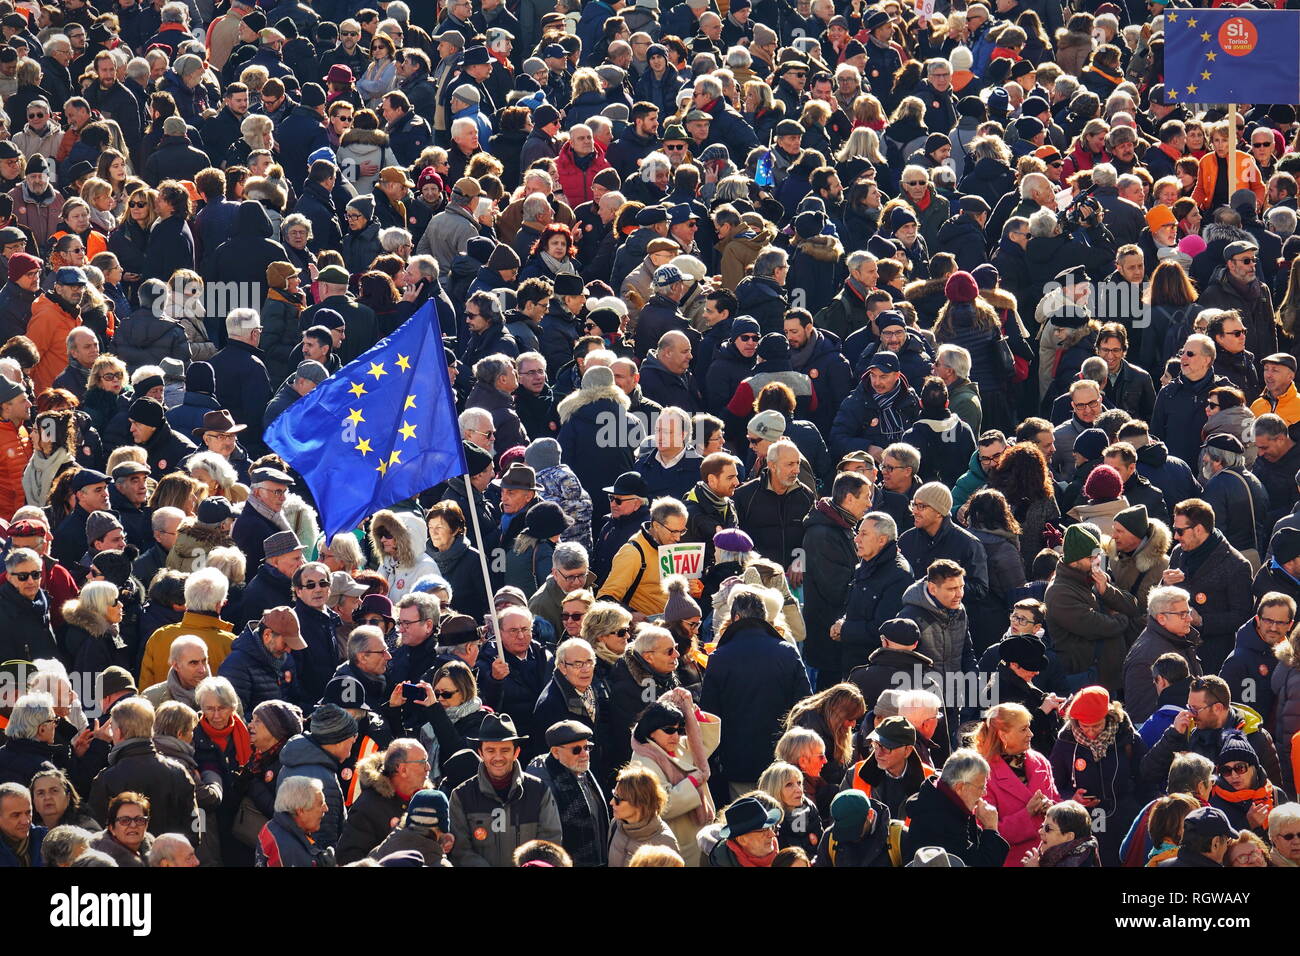 Demonstration in favour of the European Union against nationalist movements. Turin, Italy - January 2019 Stock Photo